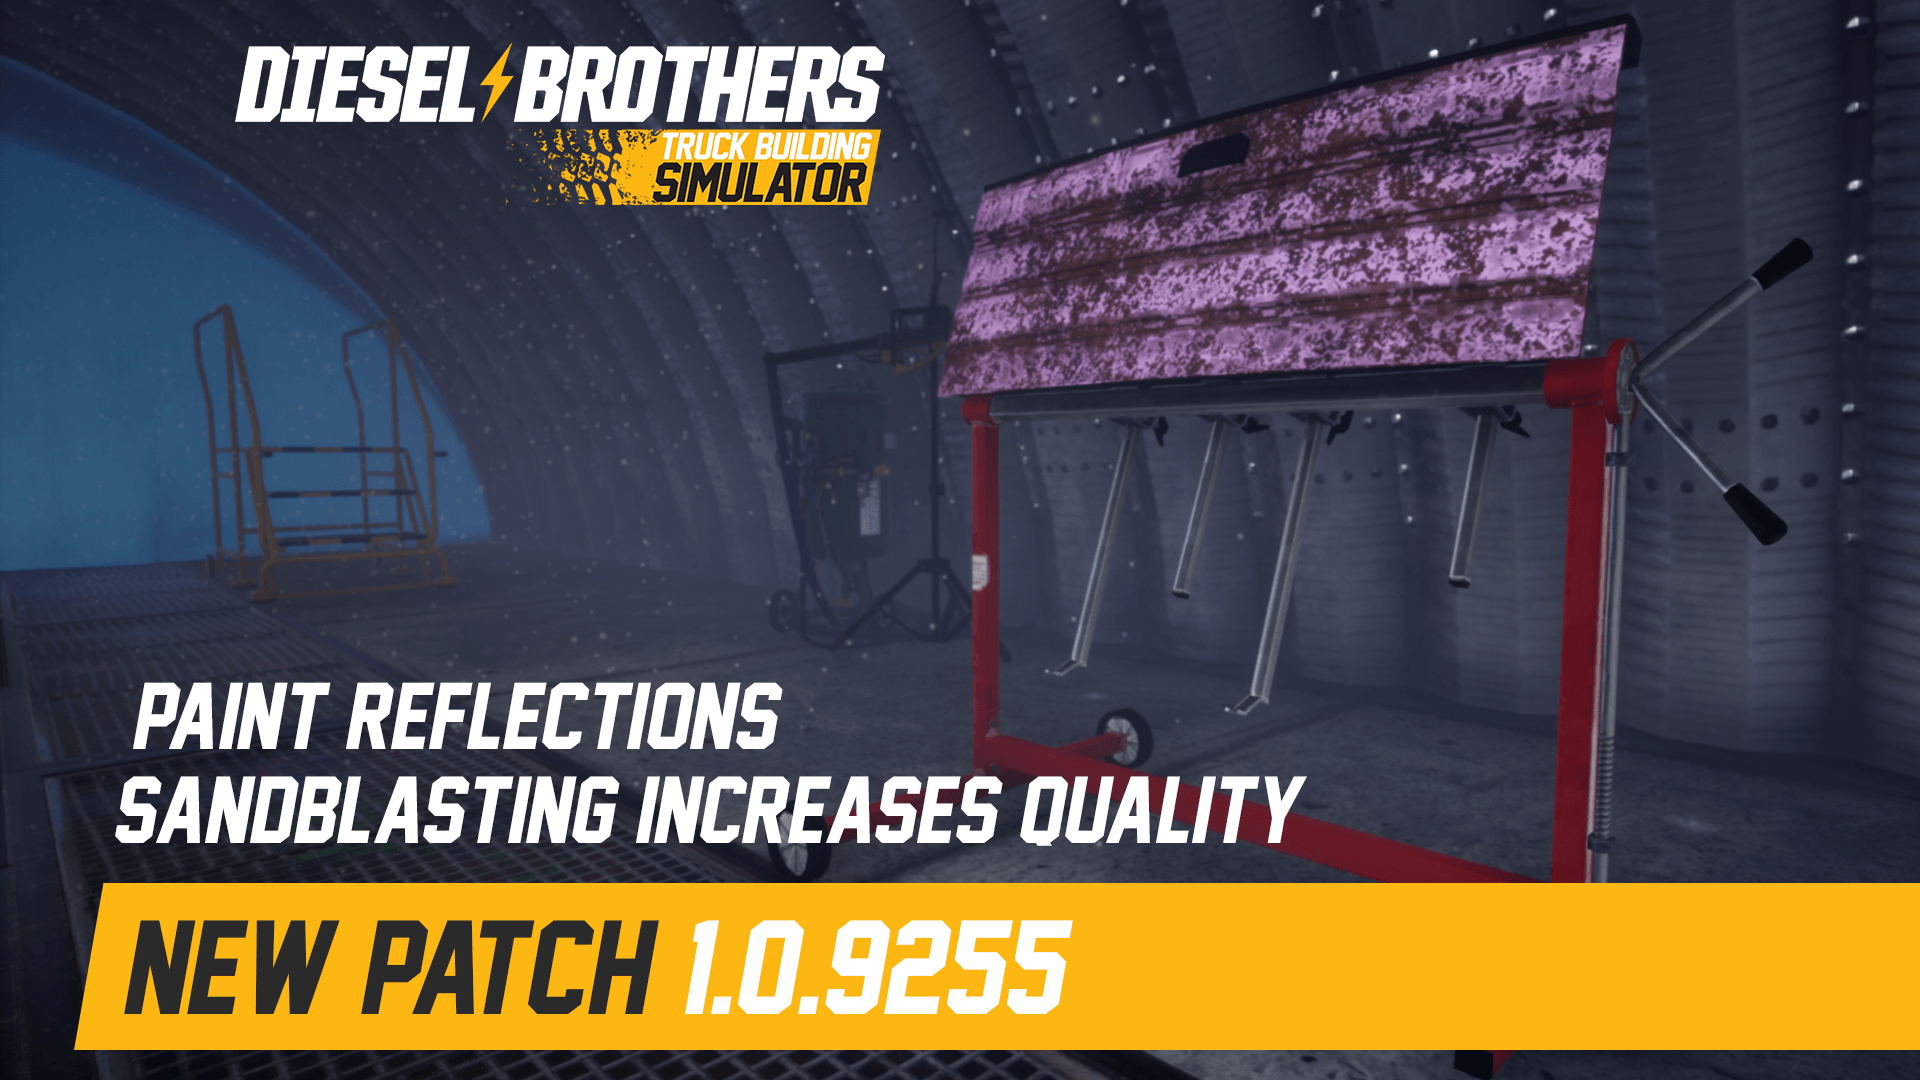 Diesel Brothers: Truck Building Simulator update for May 2019